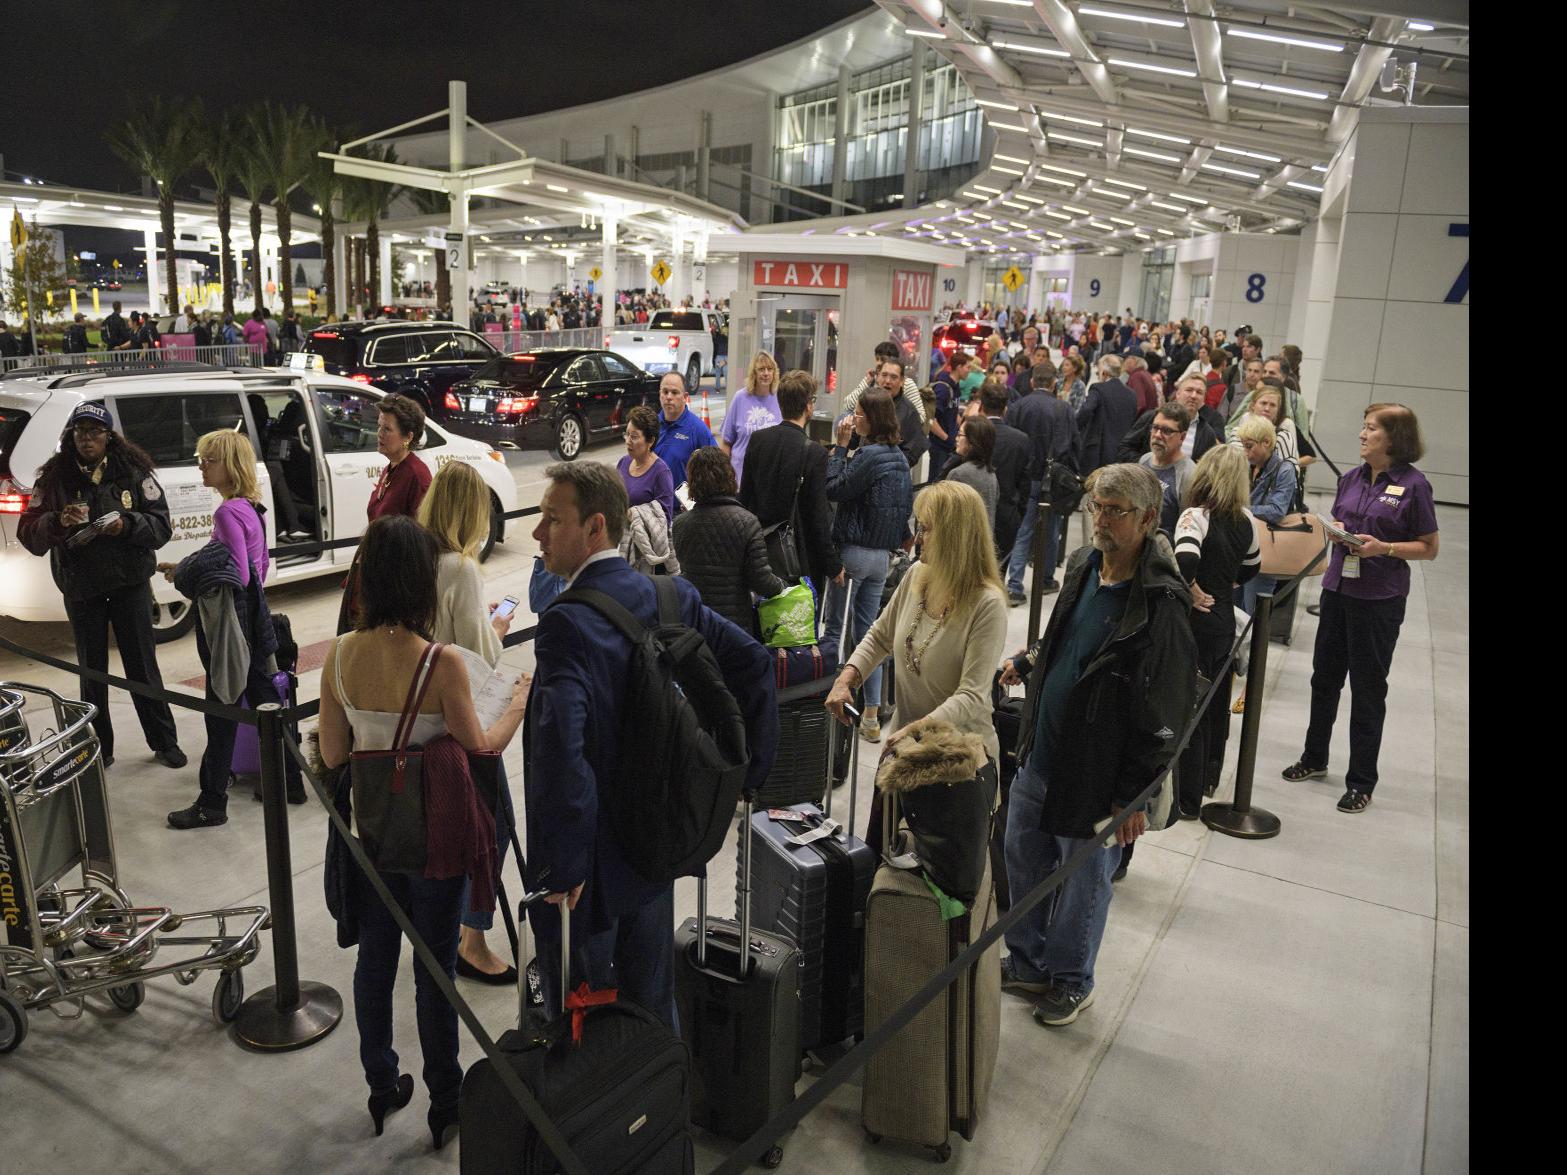 Uber, changes coming at New Orleans airport, but gridlock arrivals is still a concern | News | nola.com